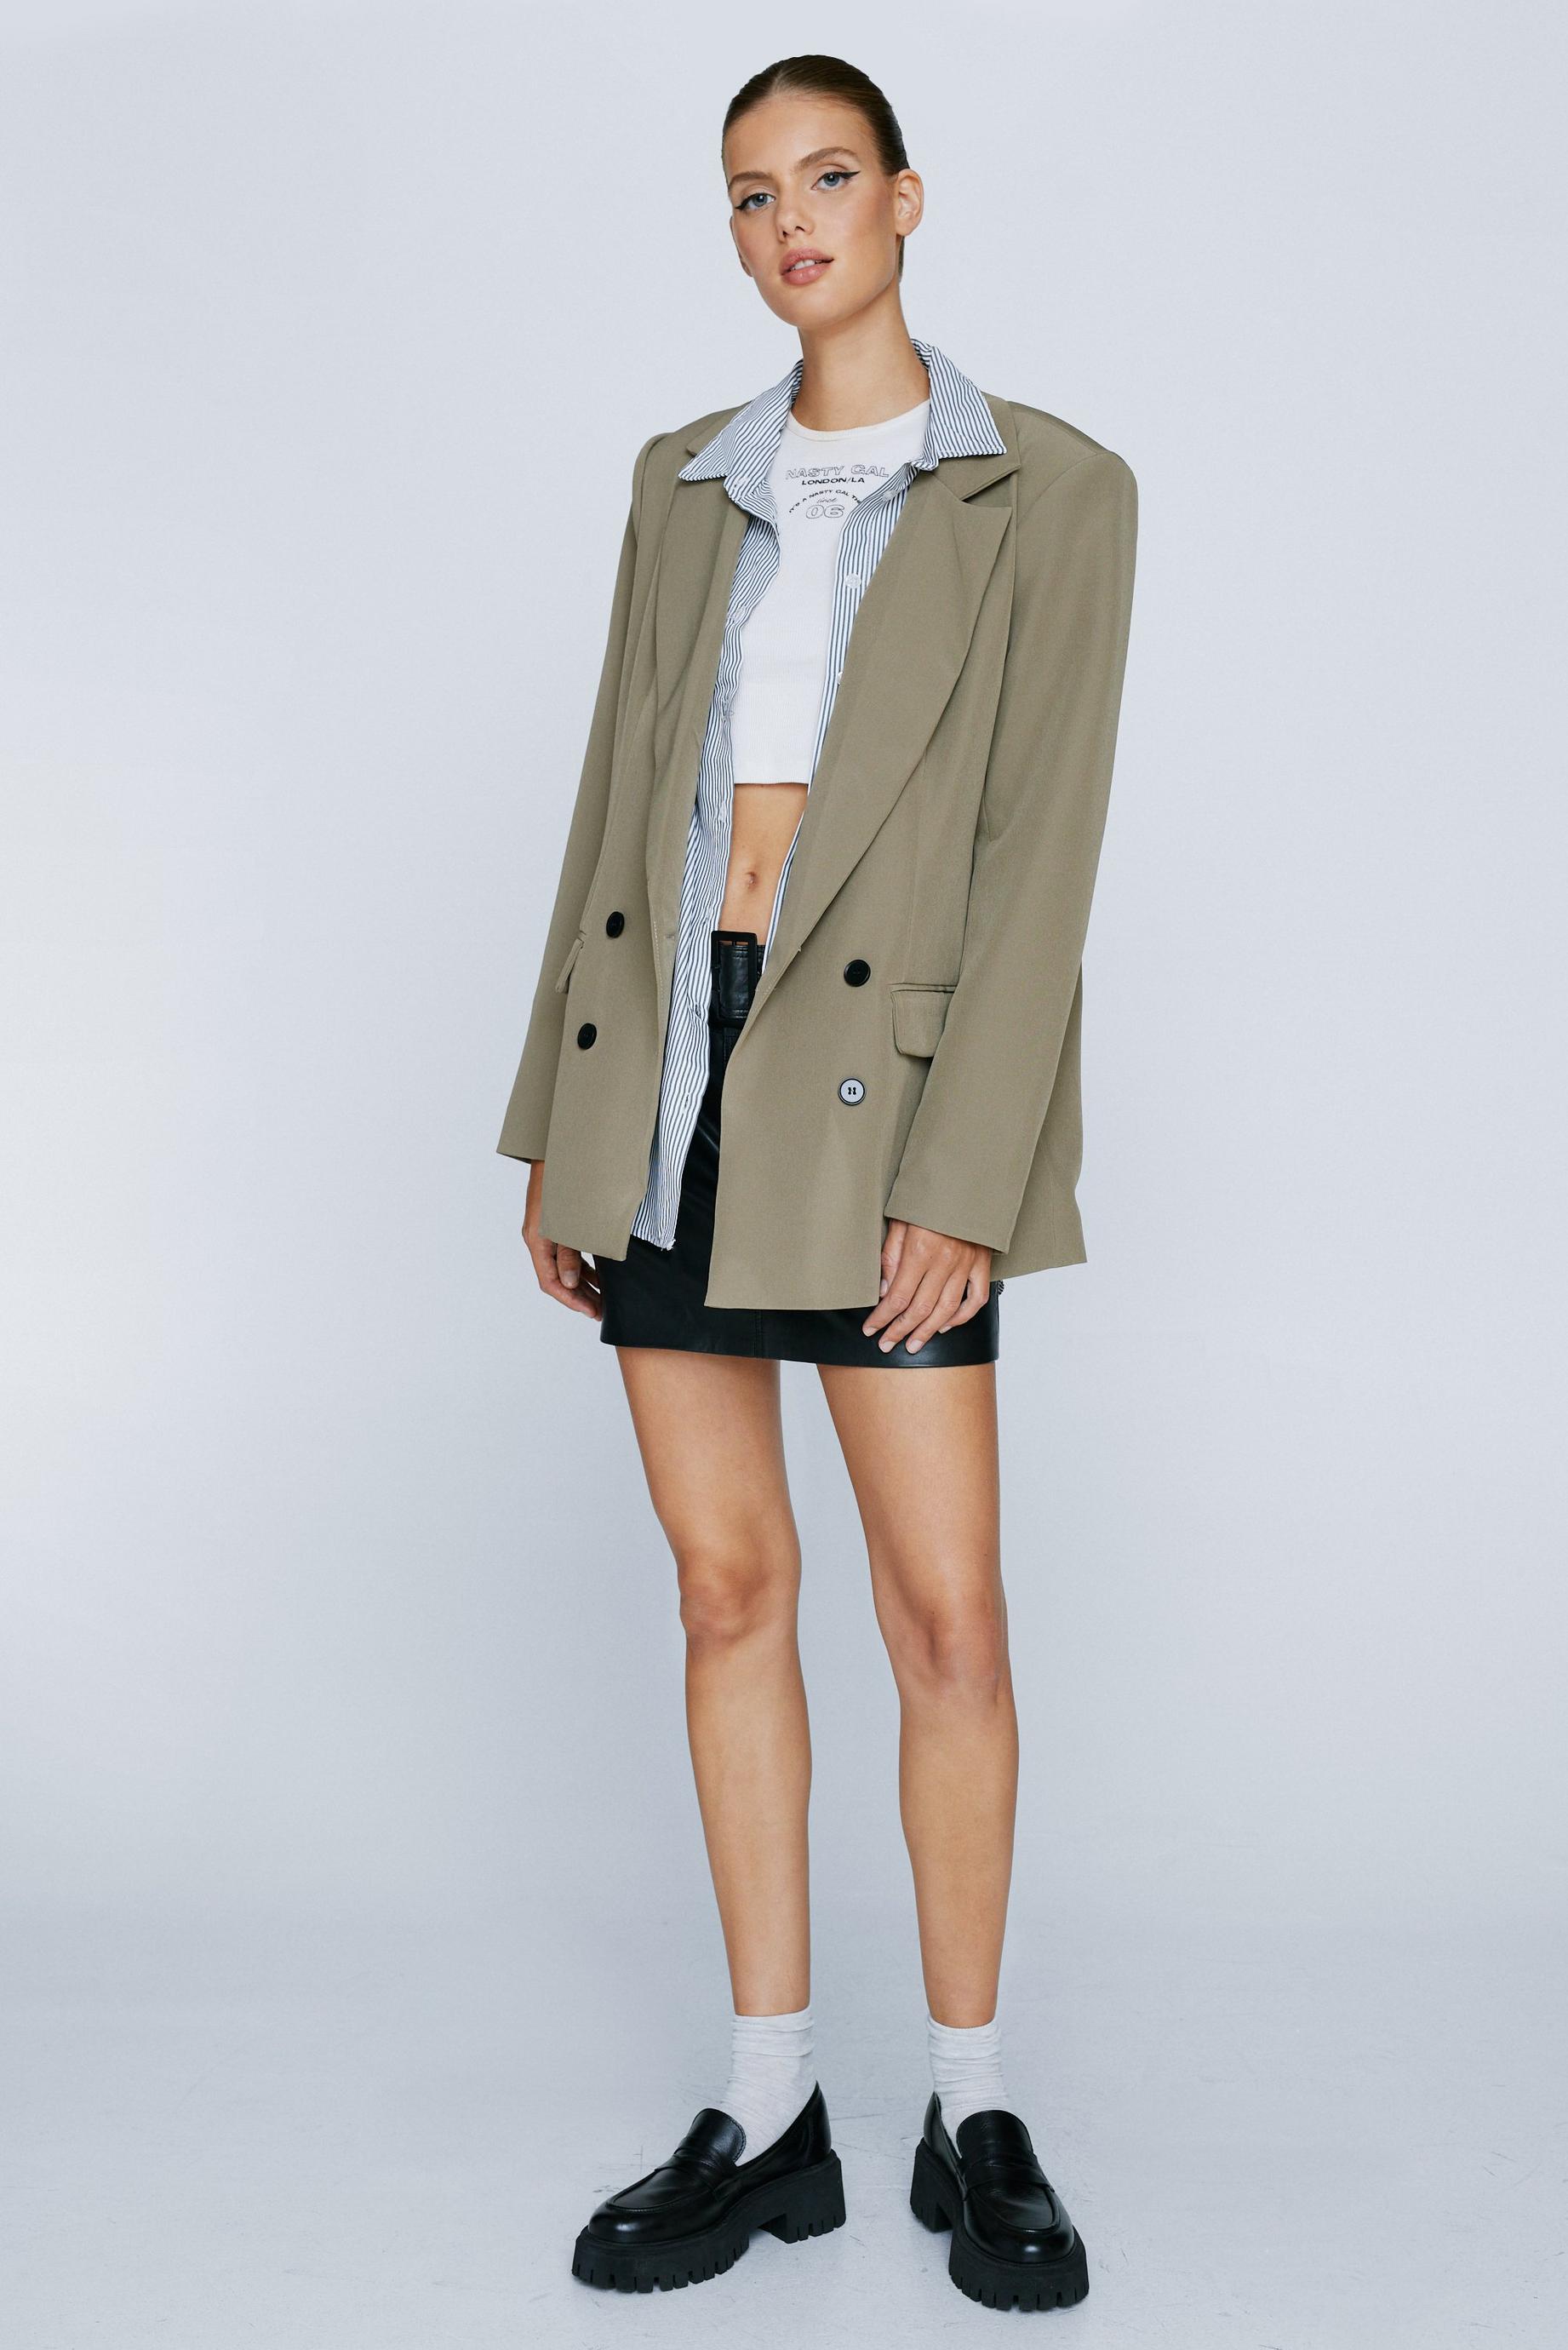 Out of Hours Oversized Double Breasted Blazer